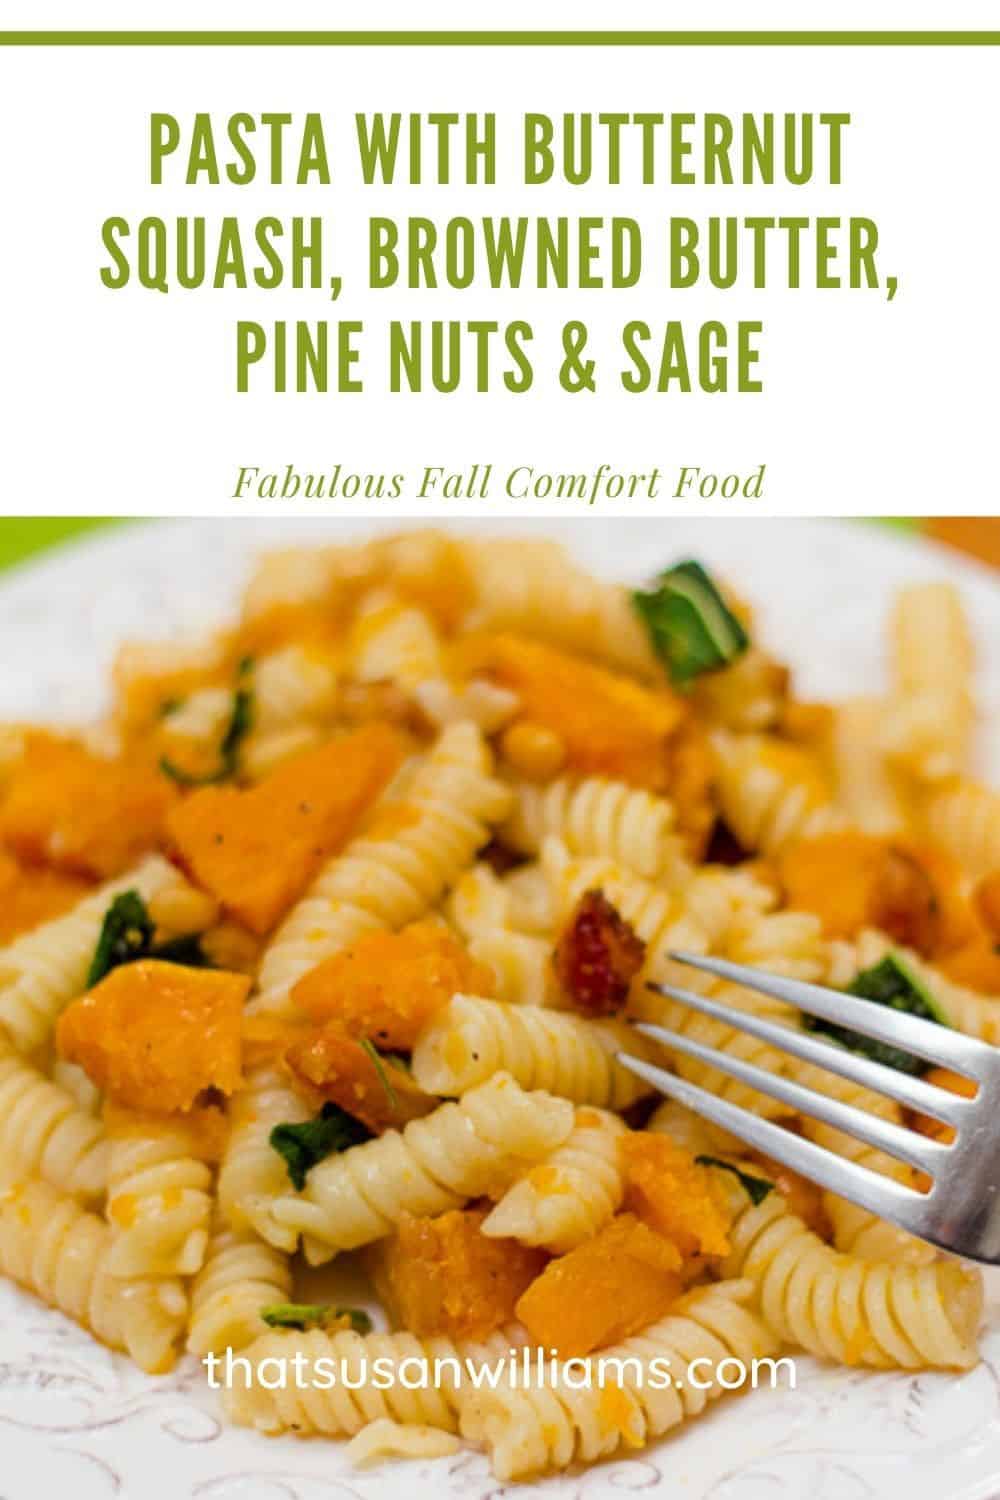 Pasta with Butternut Squash, Browned Butter, Pine Nuts & Sage